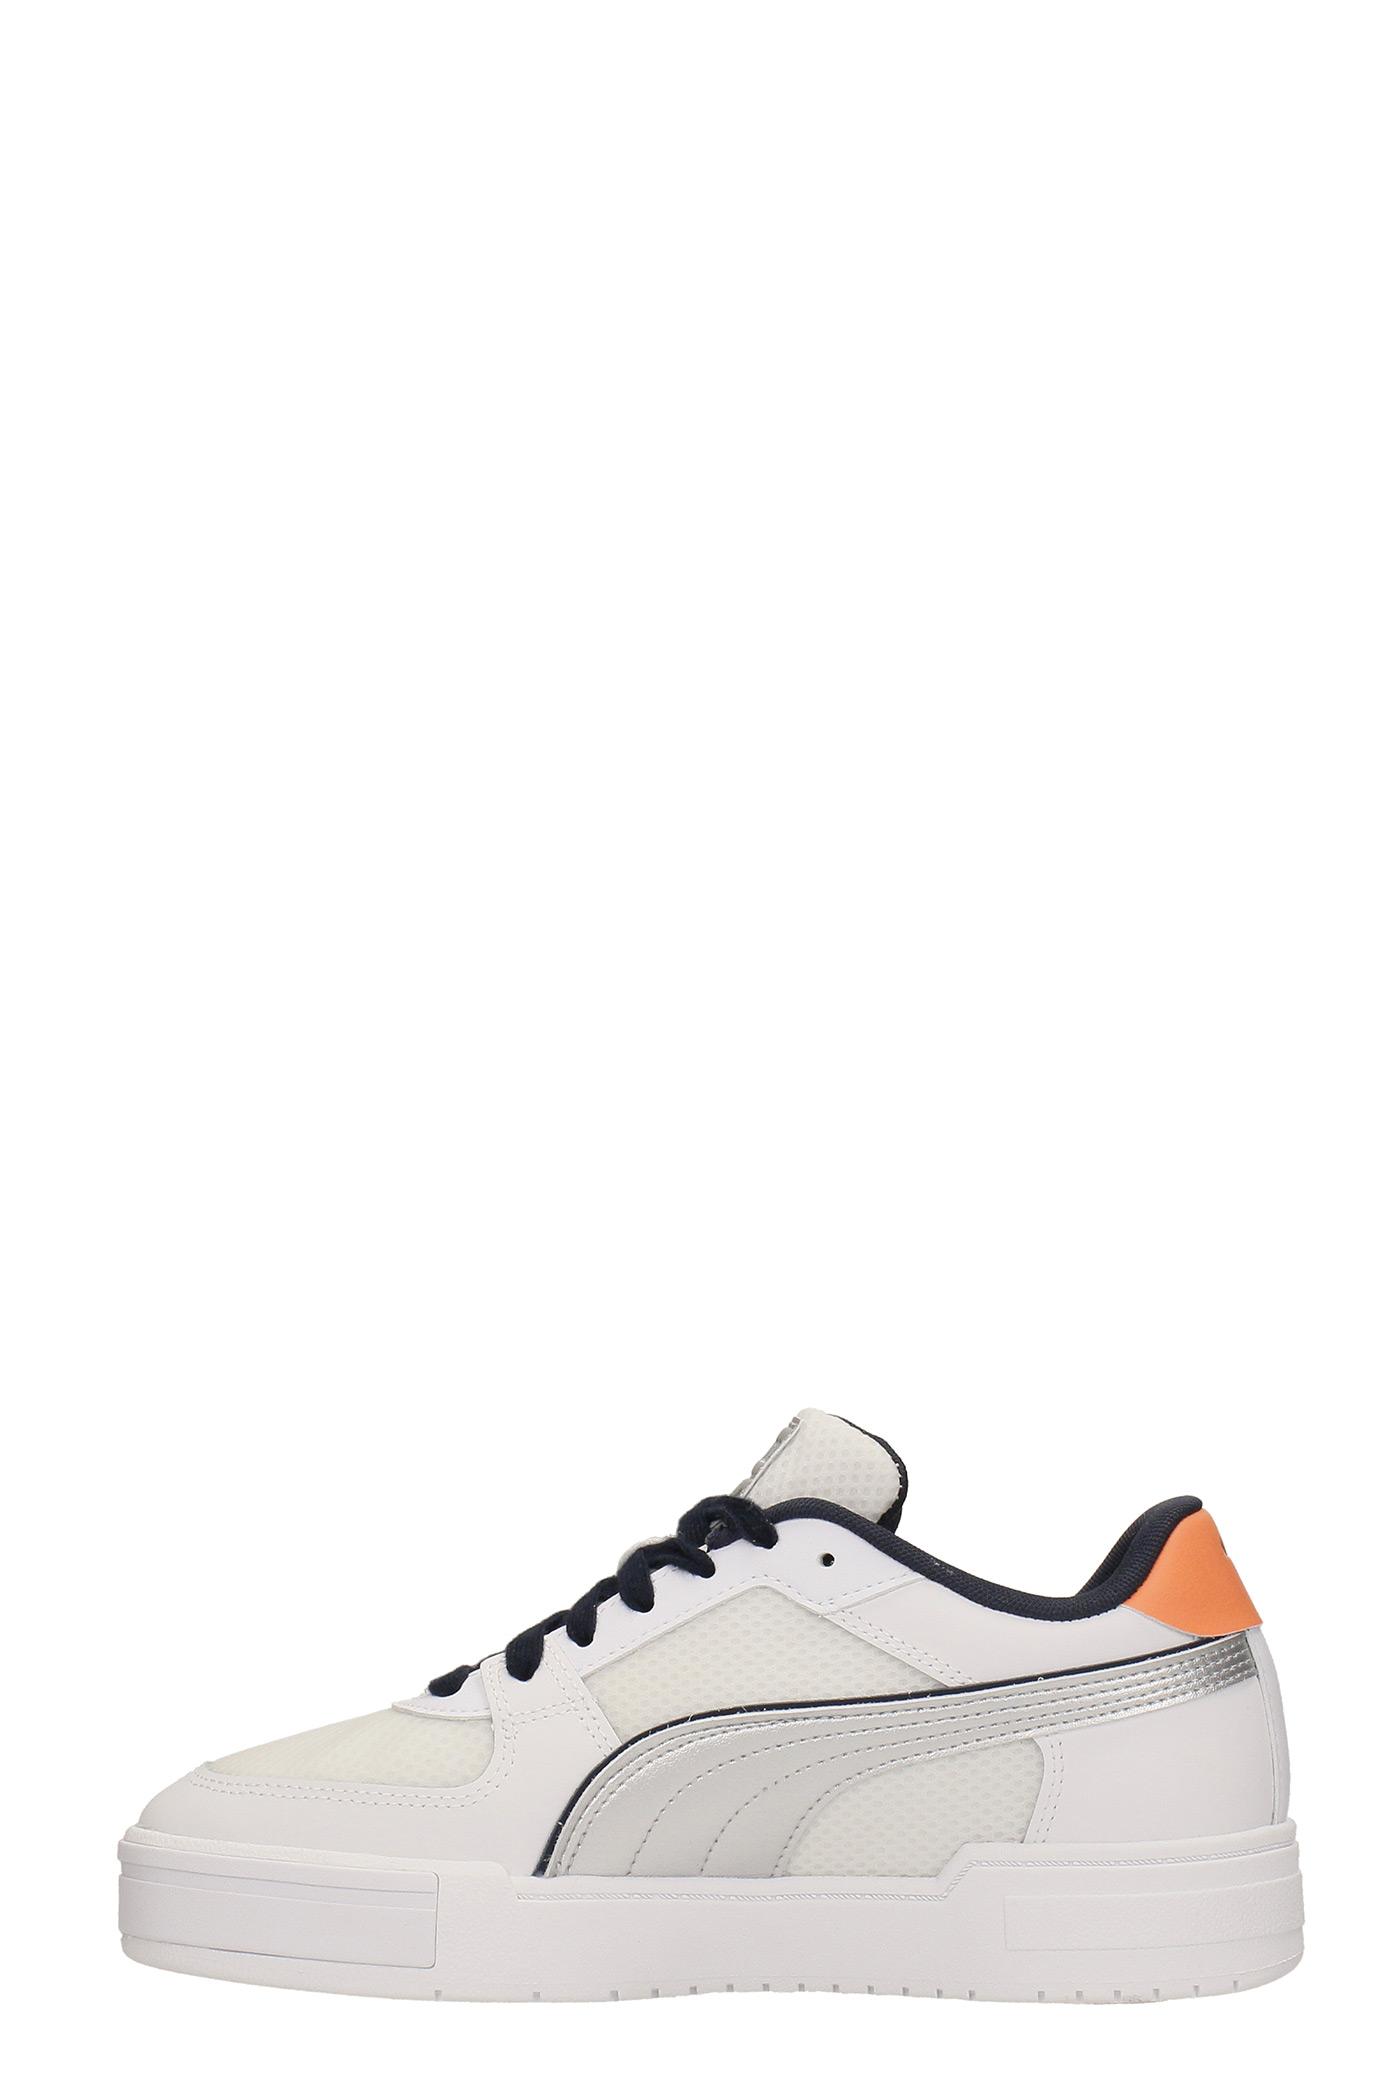 PUMA Ca Pro Techstile Sneakers In White Leather And Fabric for Men | Lyst